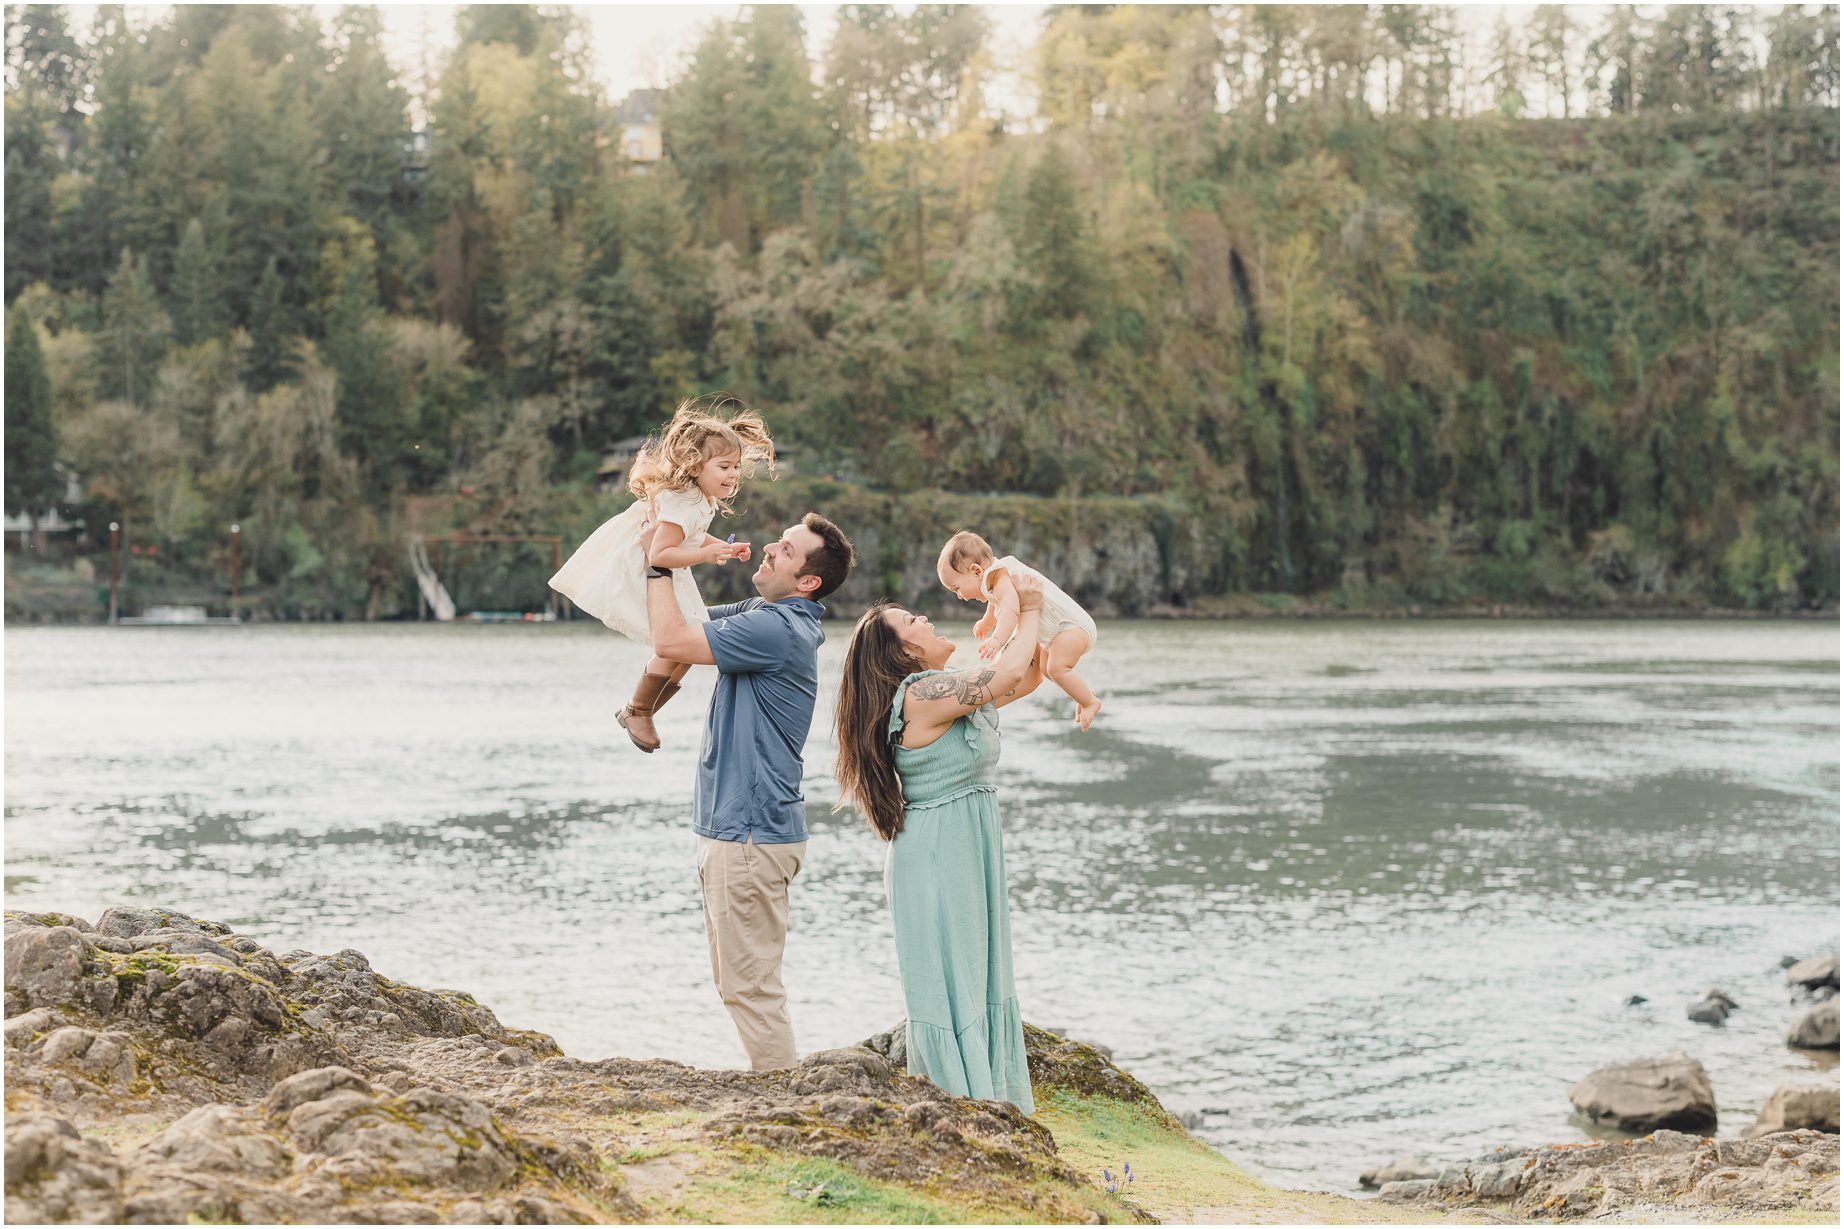 A Mother and Father lift their children up during their Whimsical Lake Oswego Family Photo Session